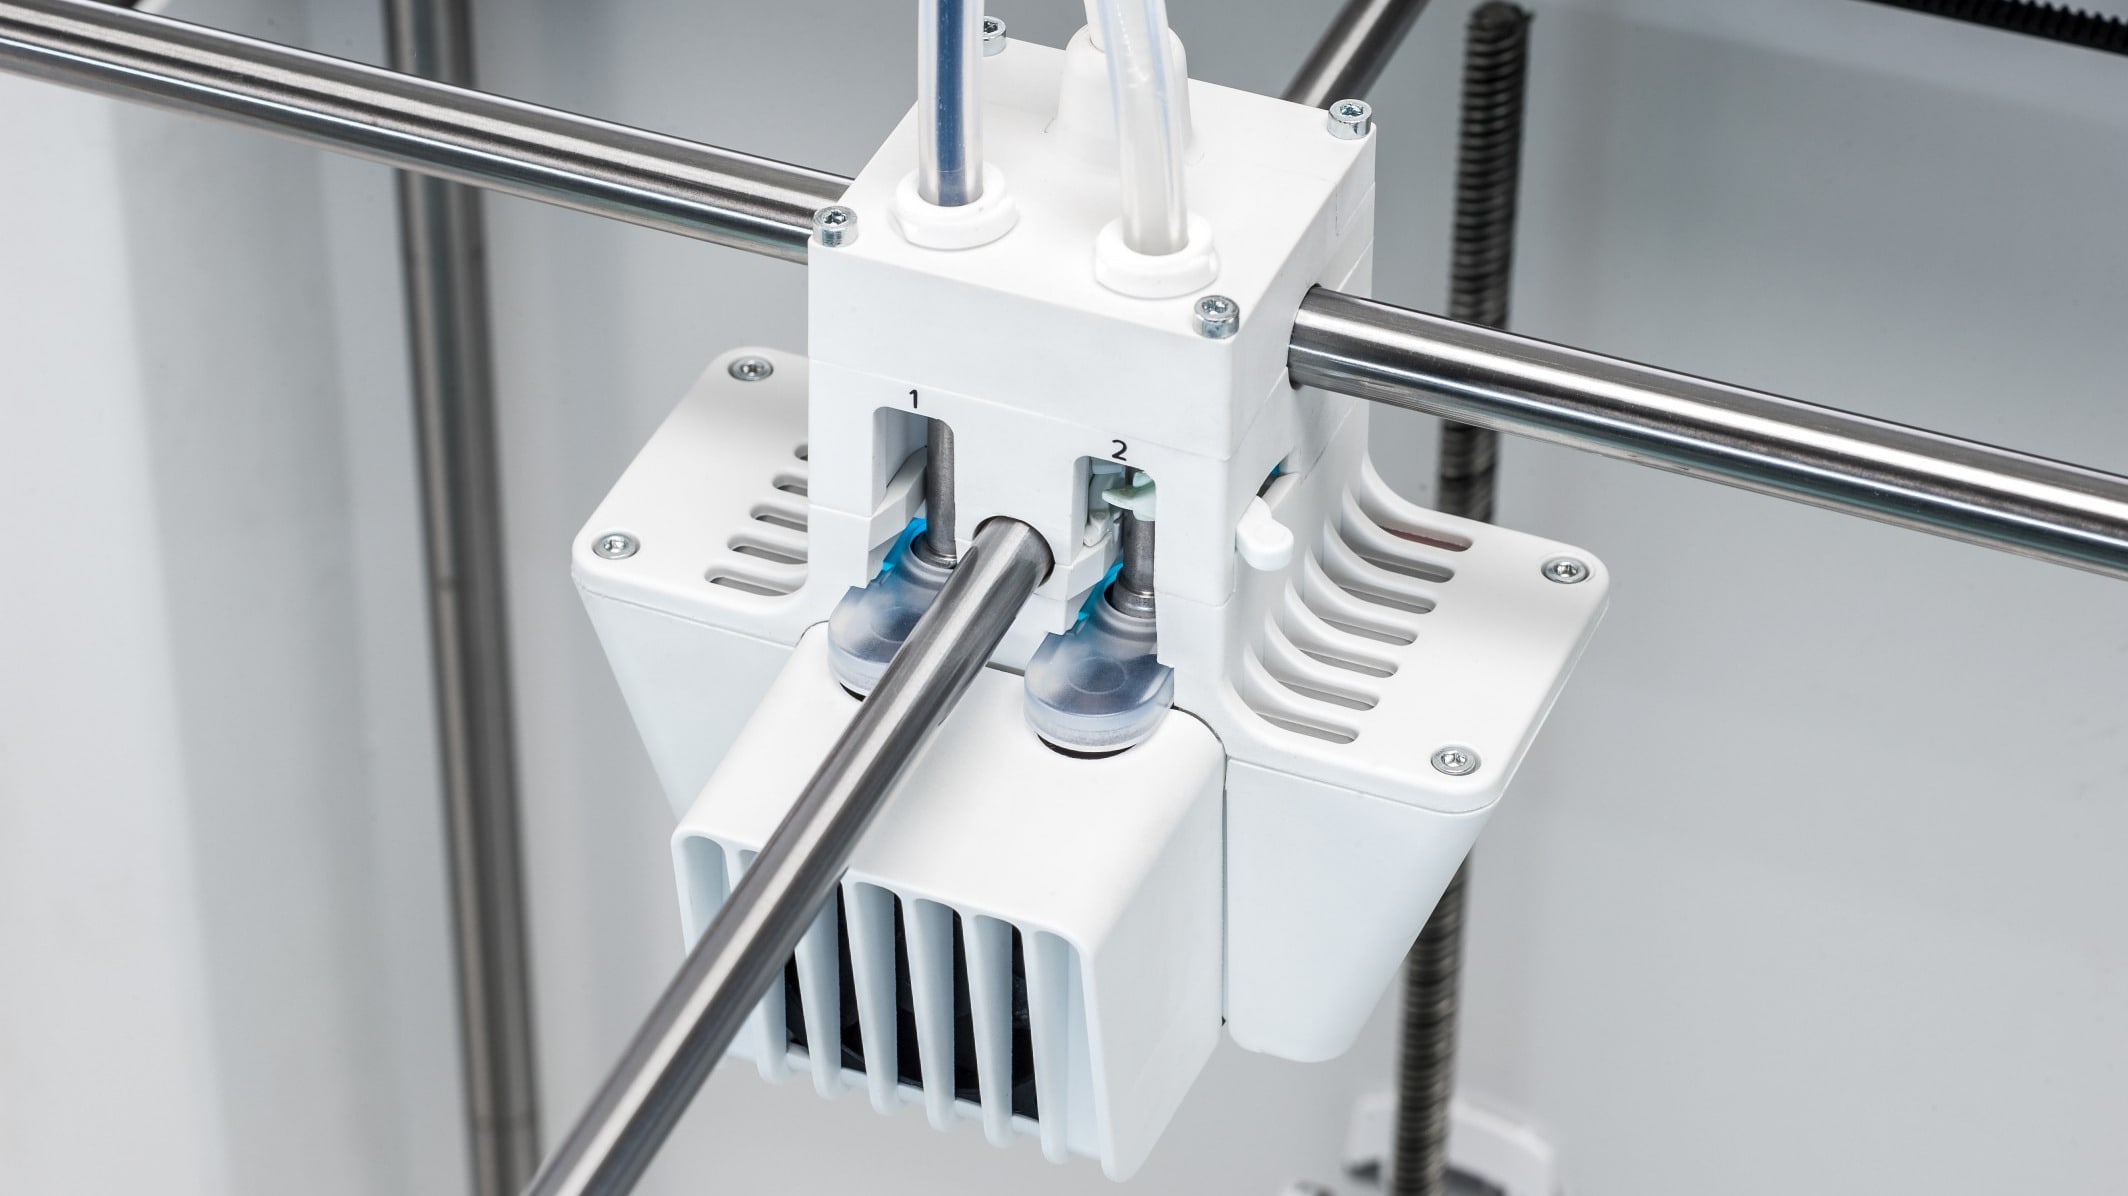 The reliable dual extrusion technology by Ultimaker allows for a great freedom of design